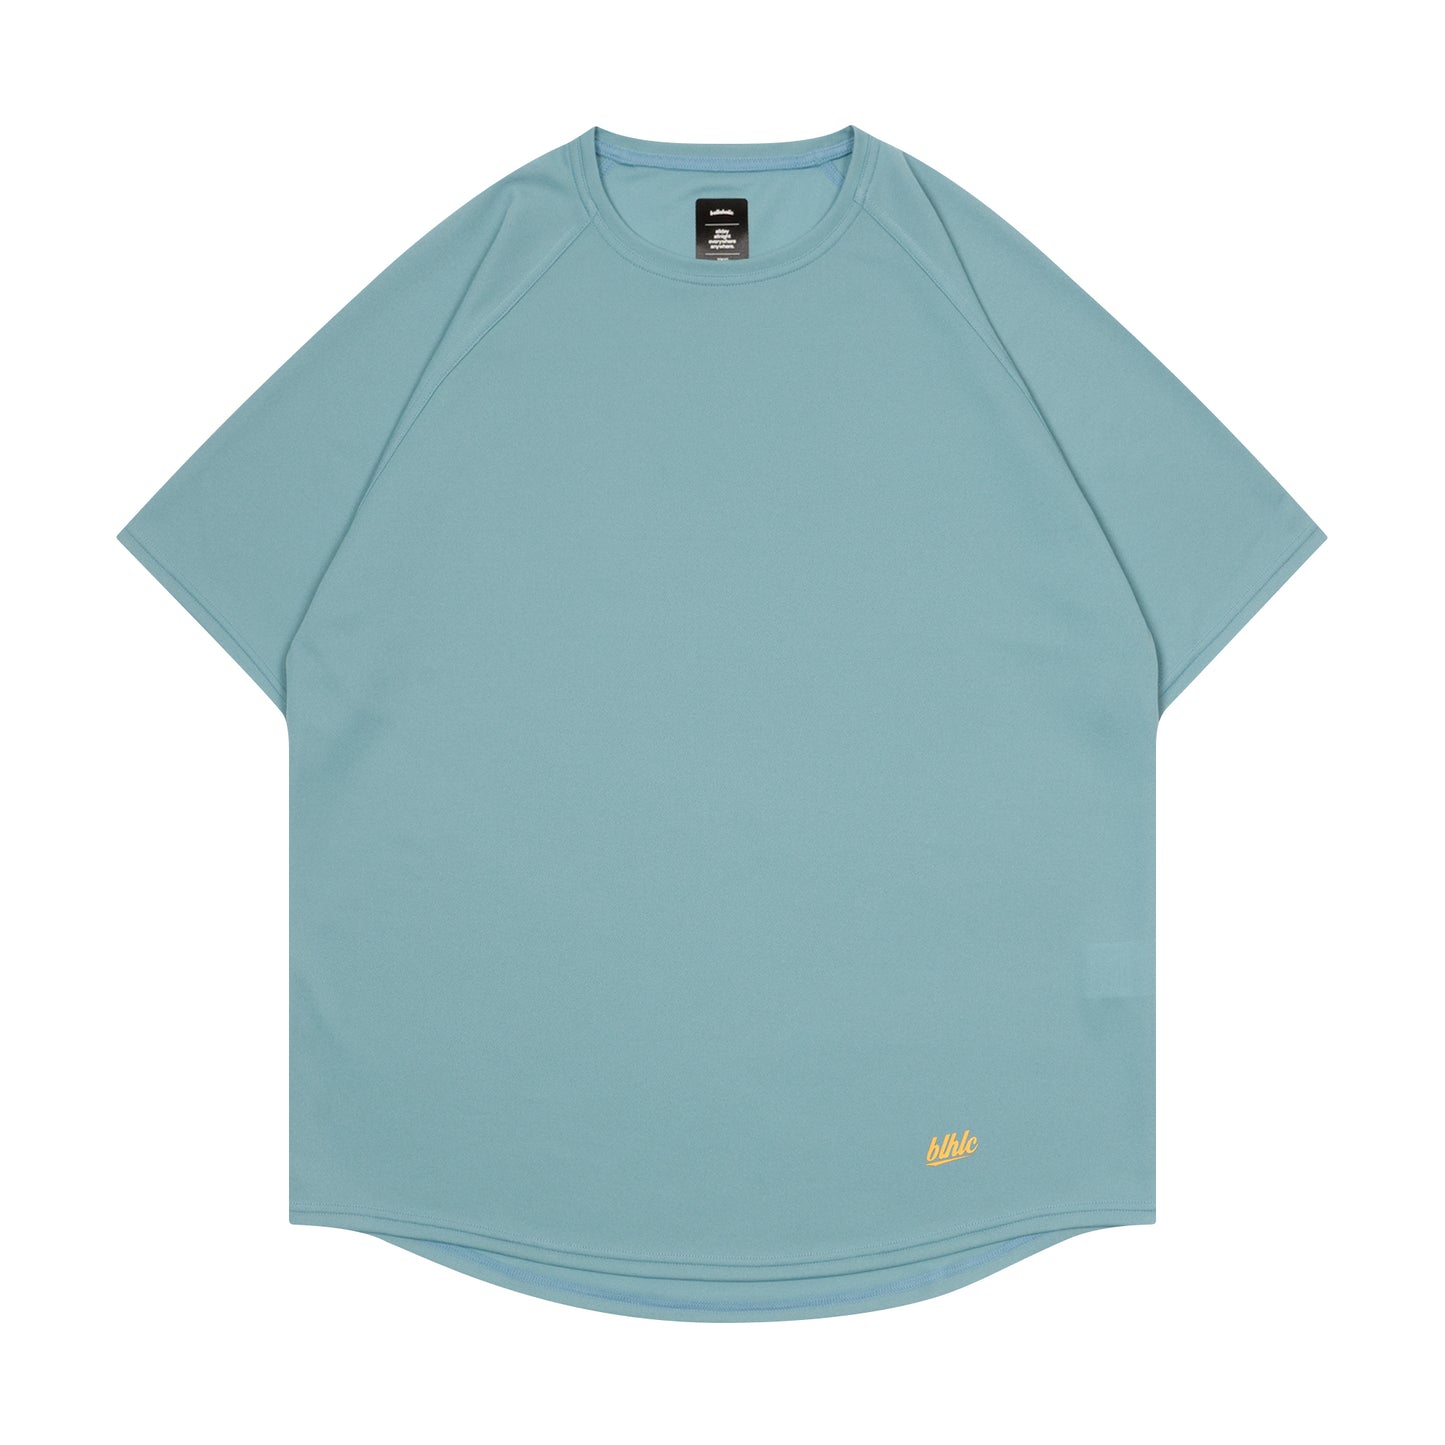 blhlc Back Print Cool Tee (adriatic blue/yellow)